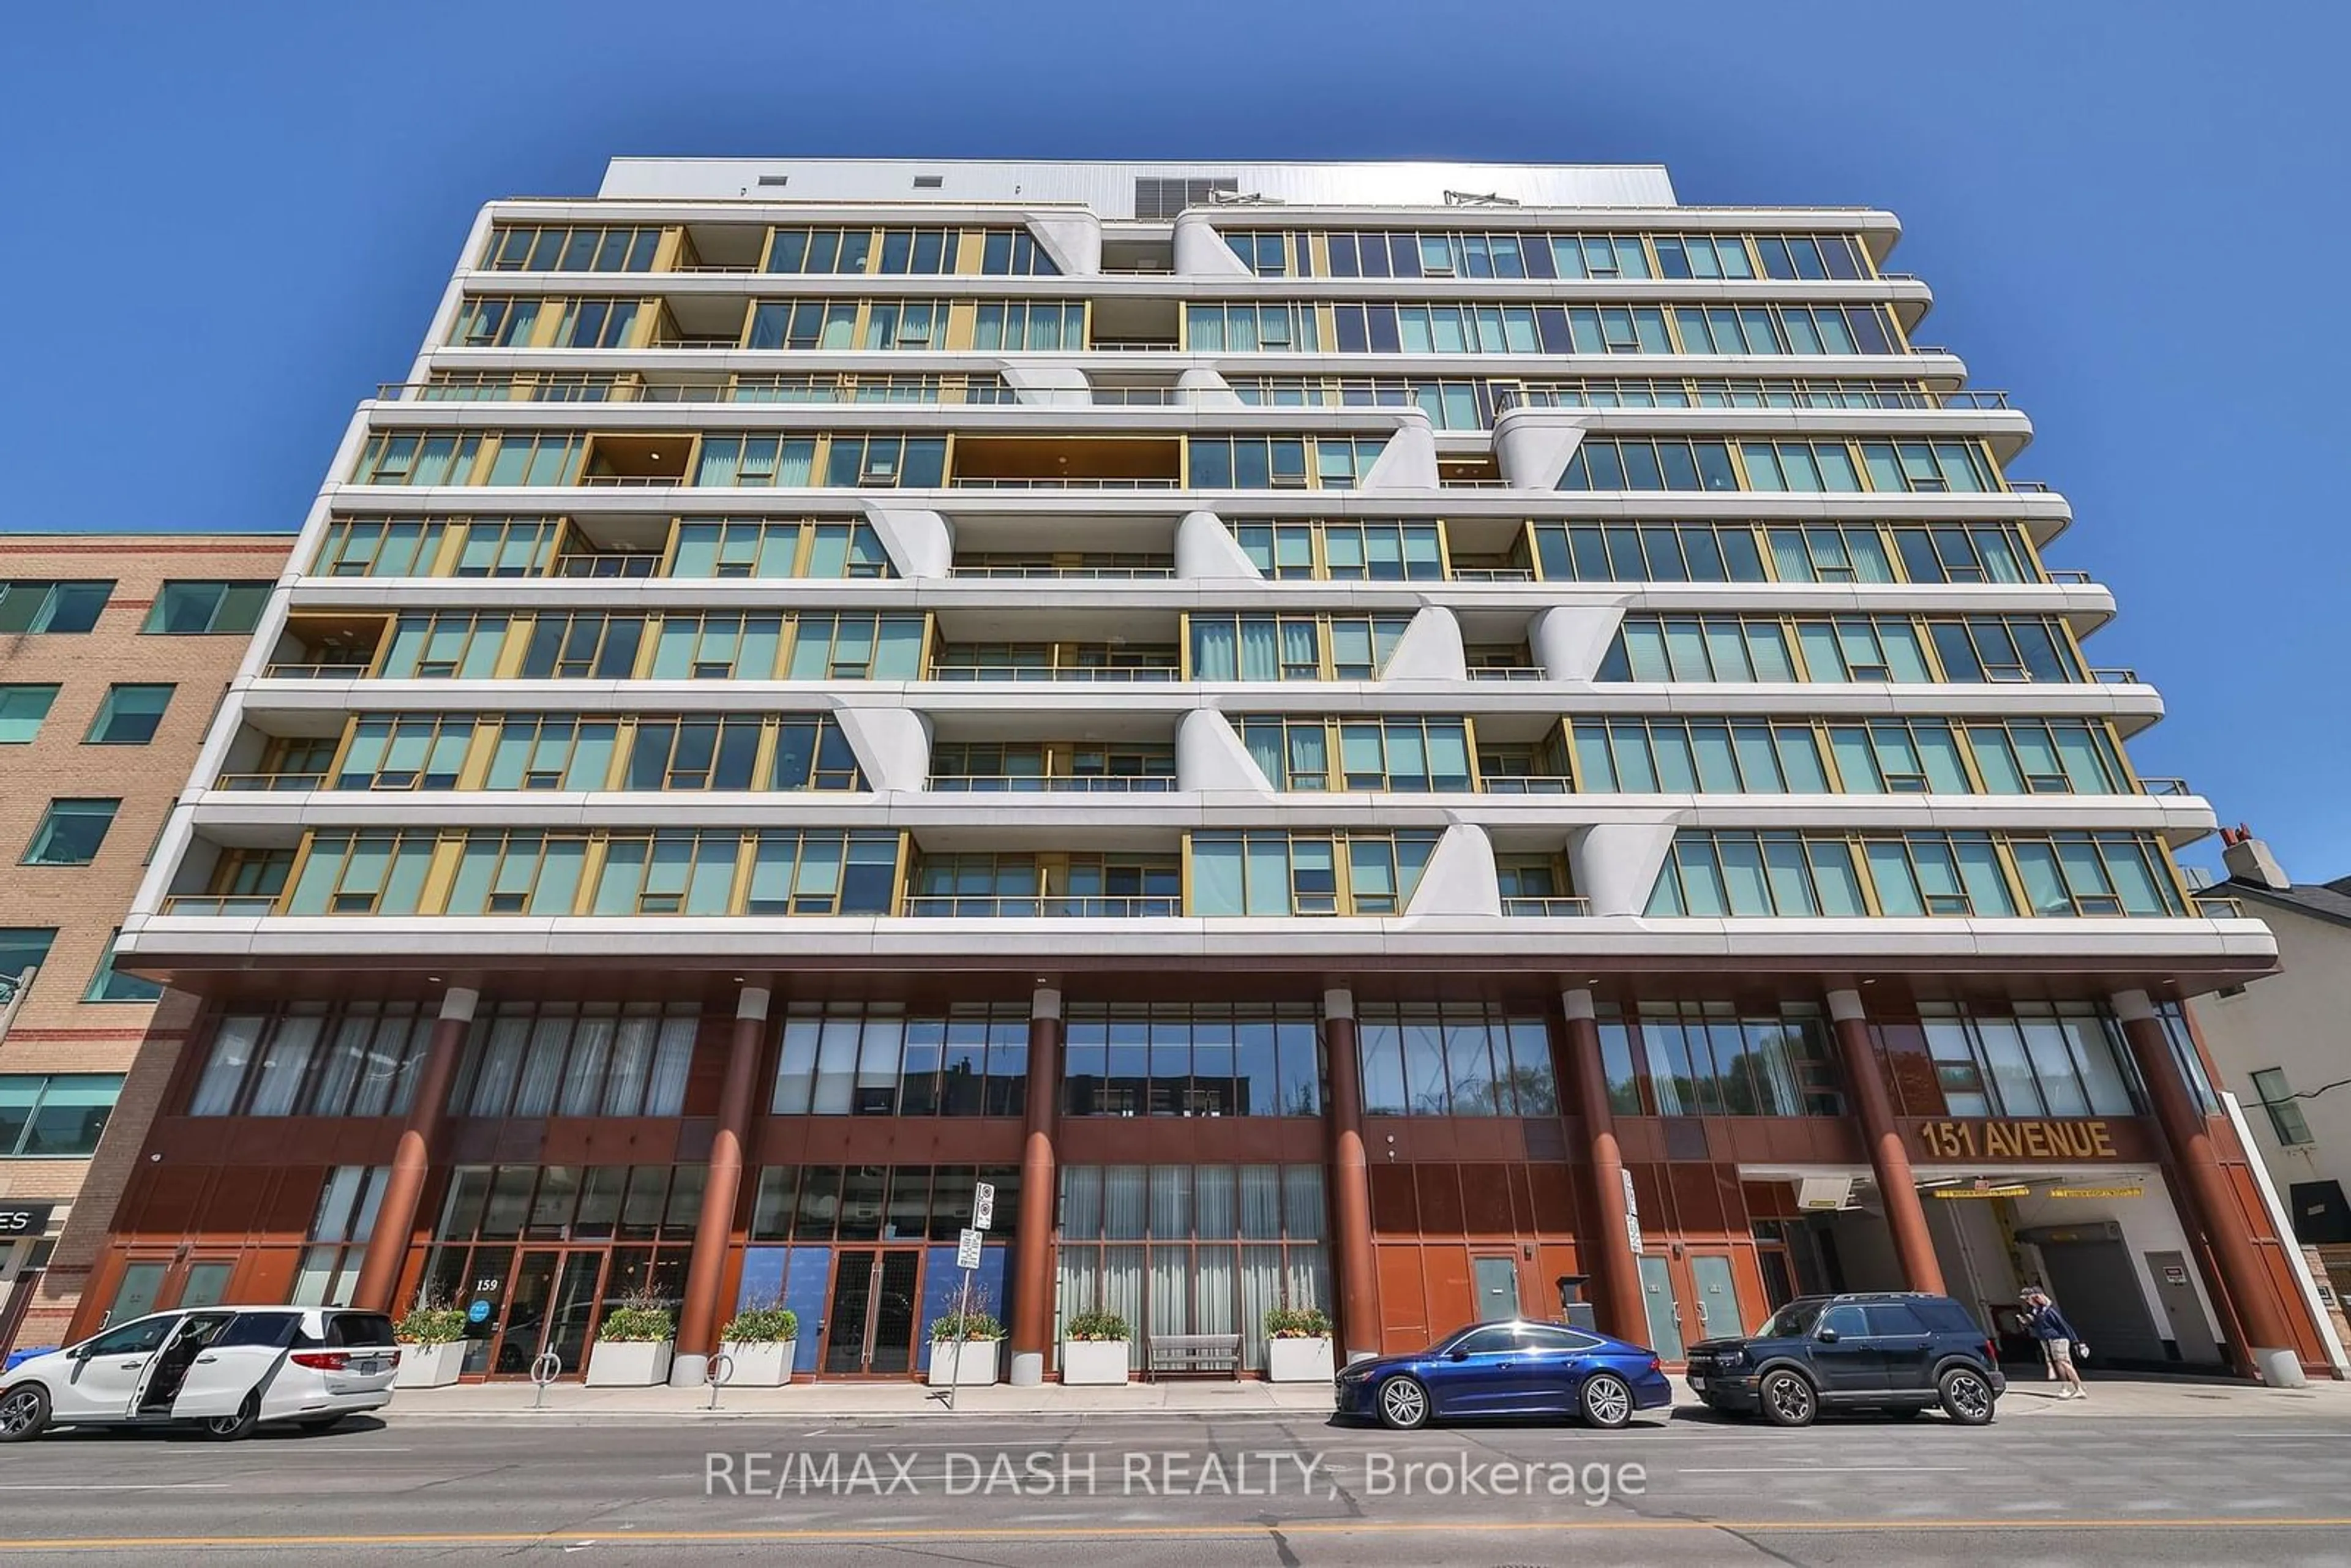 A pic from exterior of the house or condo for 151 Avenue Rd #804, Toronto Ontario M5R 2H7